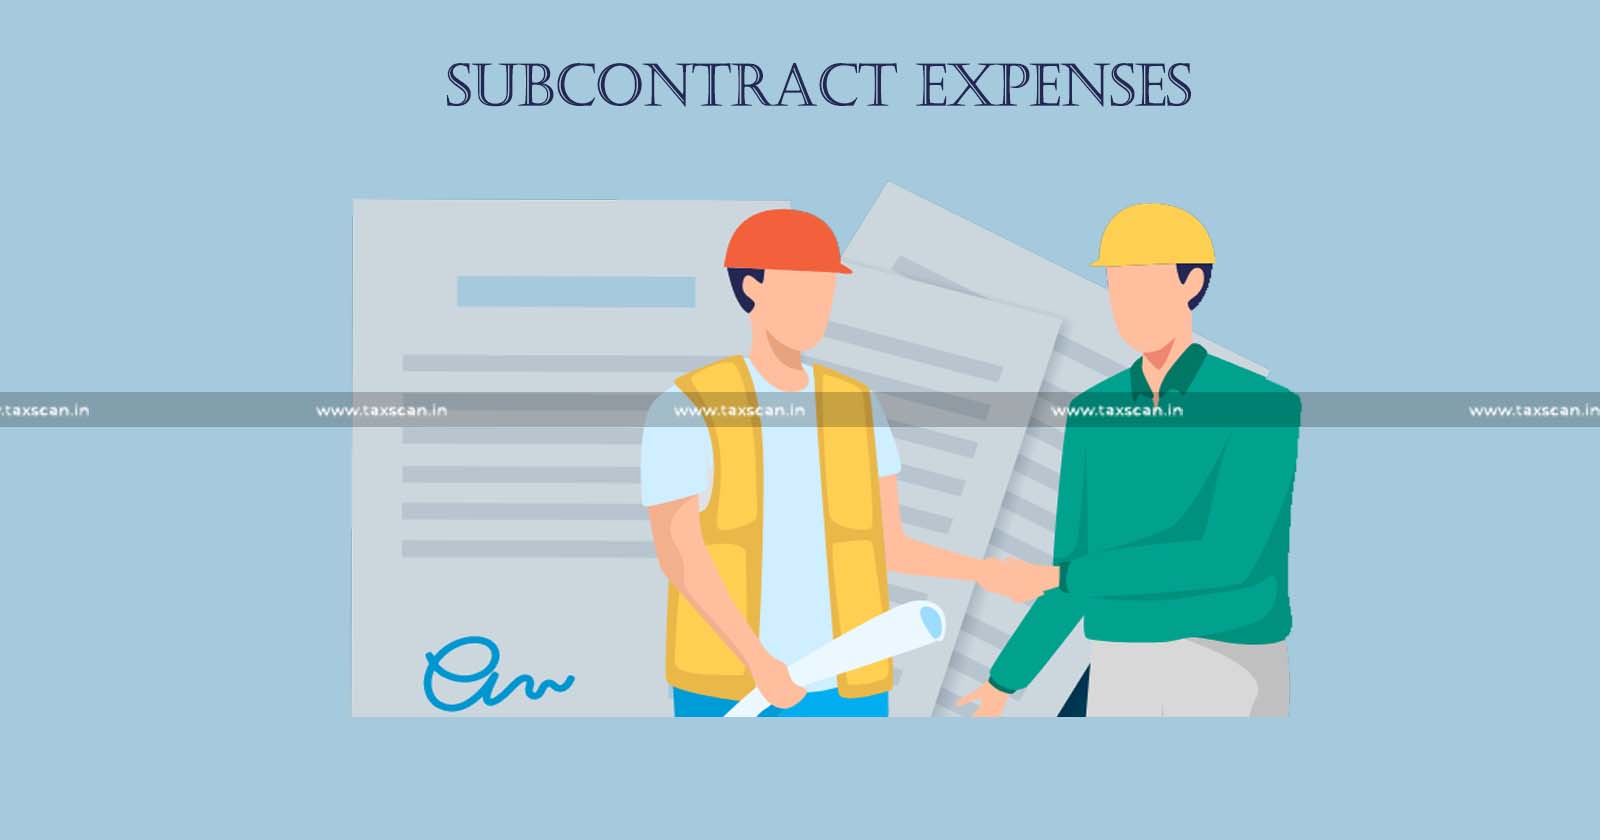 ITAT - Addition on Disallowance of Subcontract Expenses - Lack of Evidence -ITAT Deletes Addition - Addition on Disallowance of Subcontract Expenses - Subcontract Expenses- taxscan